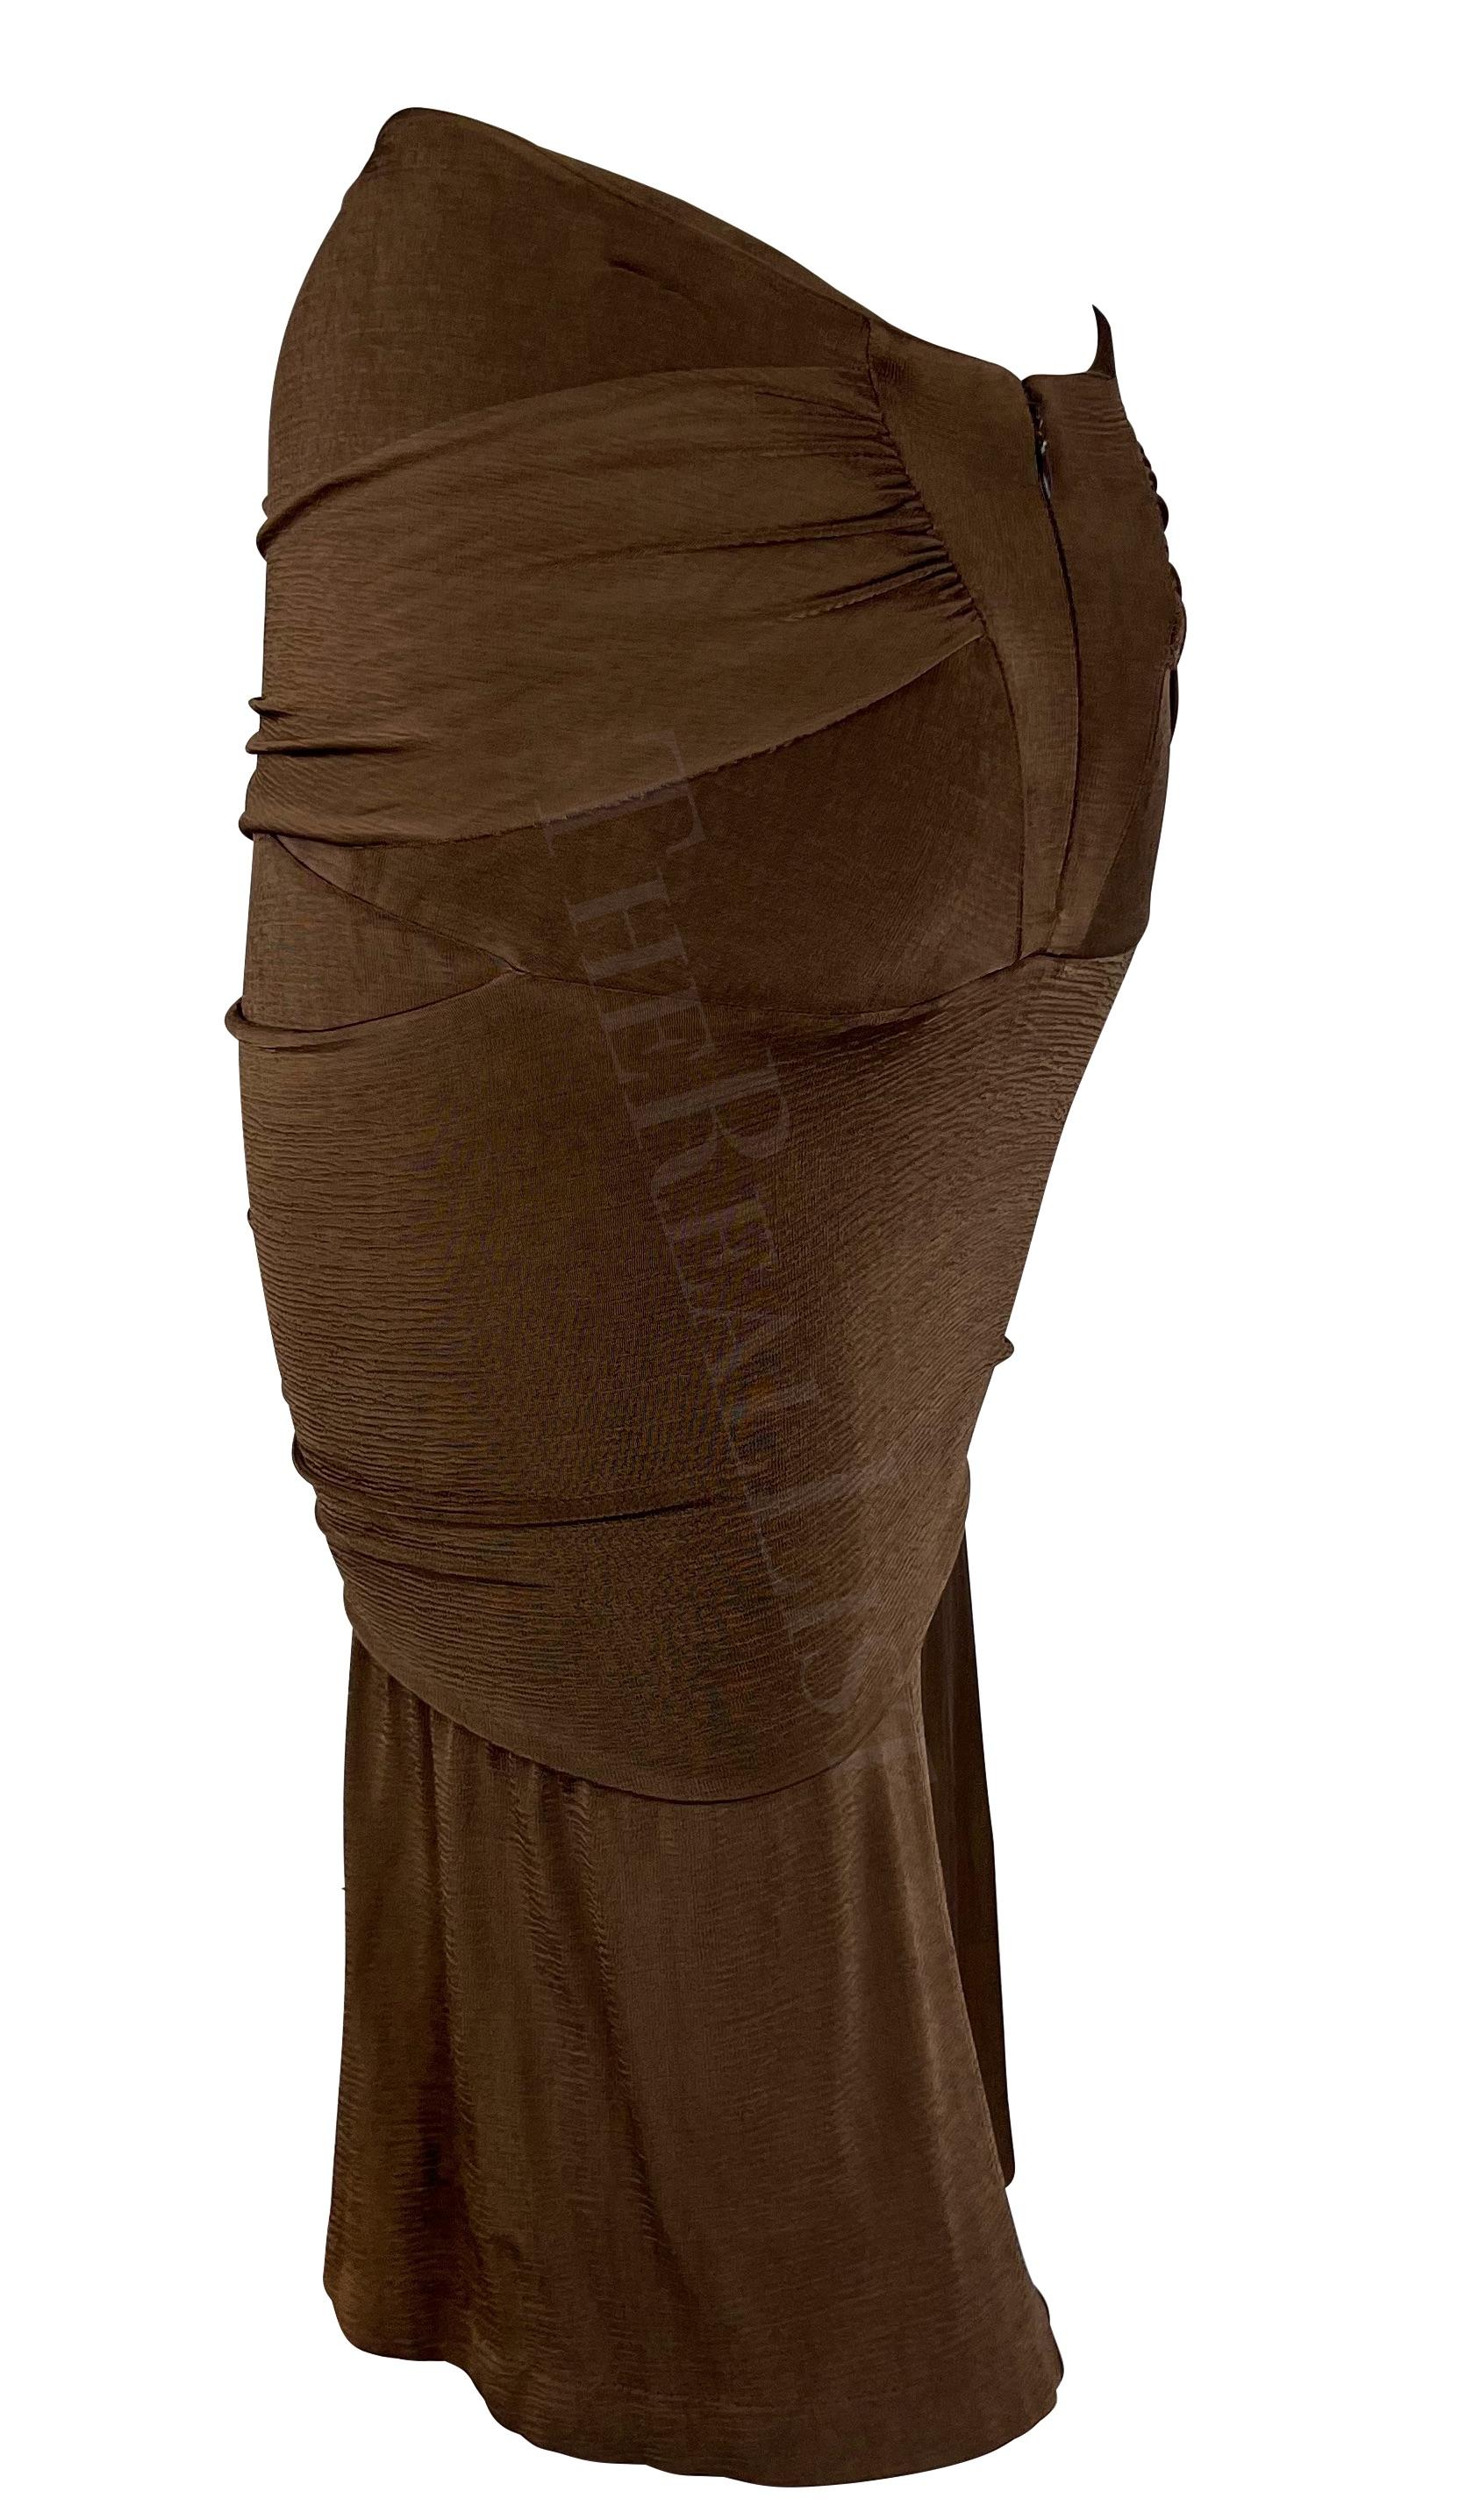 S/S 2003 Yves Saint Laurent by Tom Ford Runway Brown Ruched Slinky Skirt For Sale 3